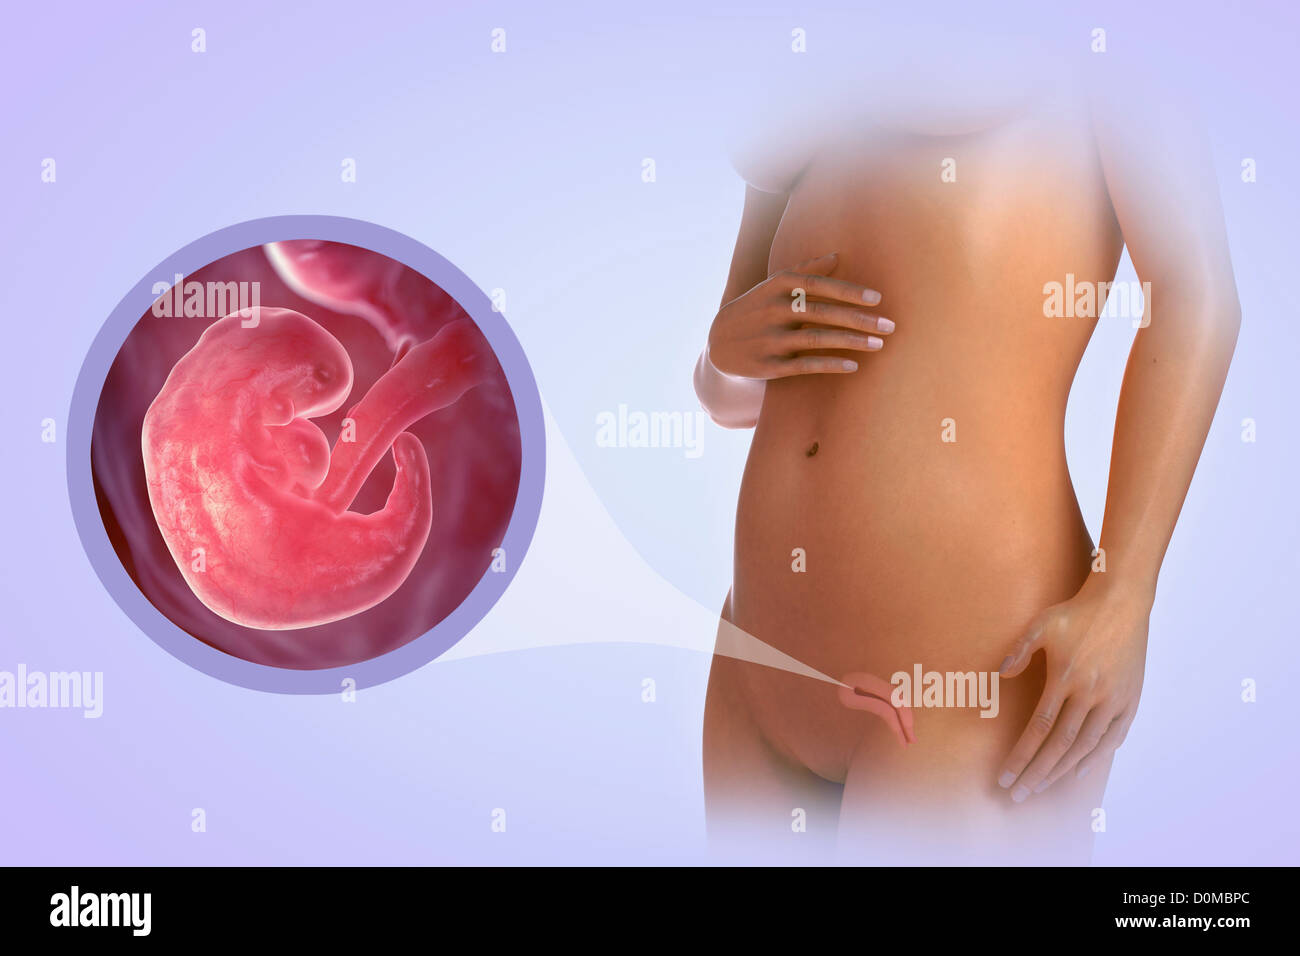 A human model showing pregnancy at week 6. Stock Photo